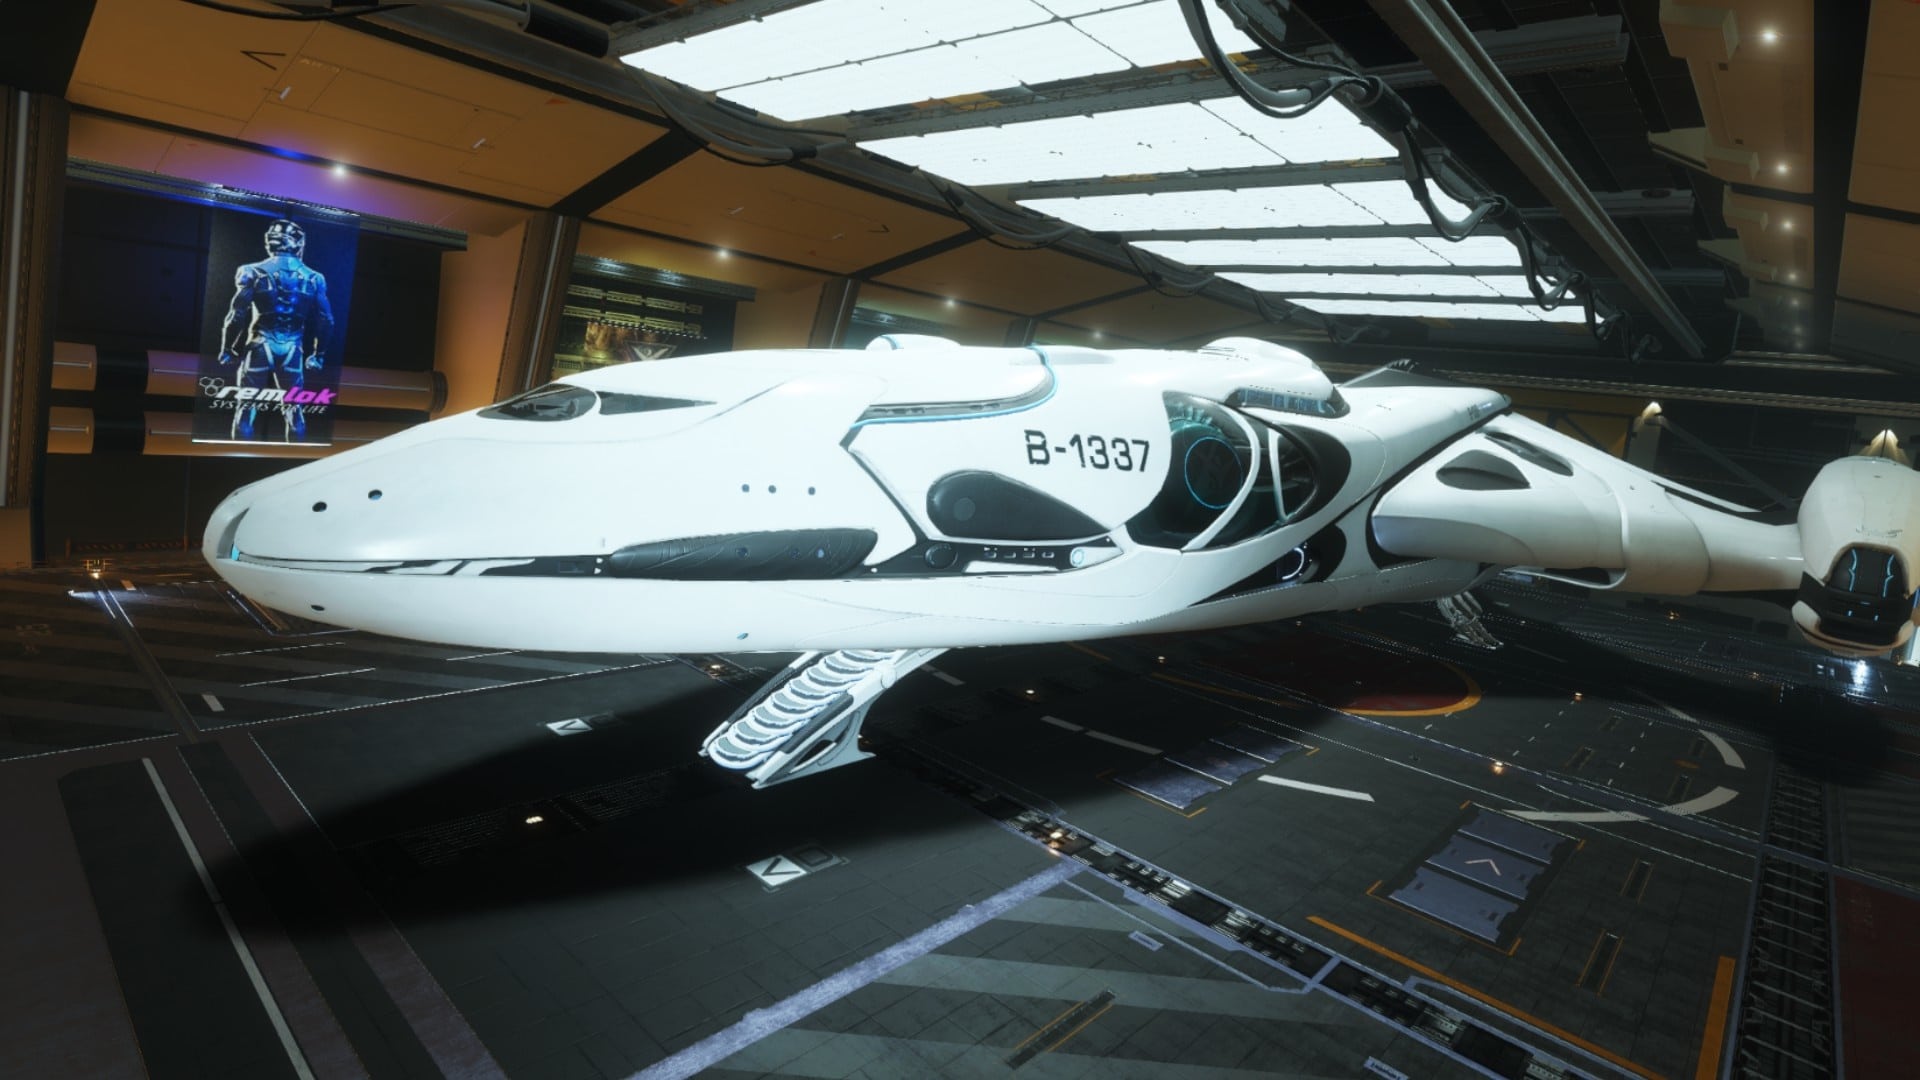 So that some pirates don't get on my nerves every five minutes, I got myself a bigger mining spaceship.